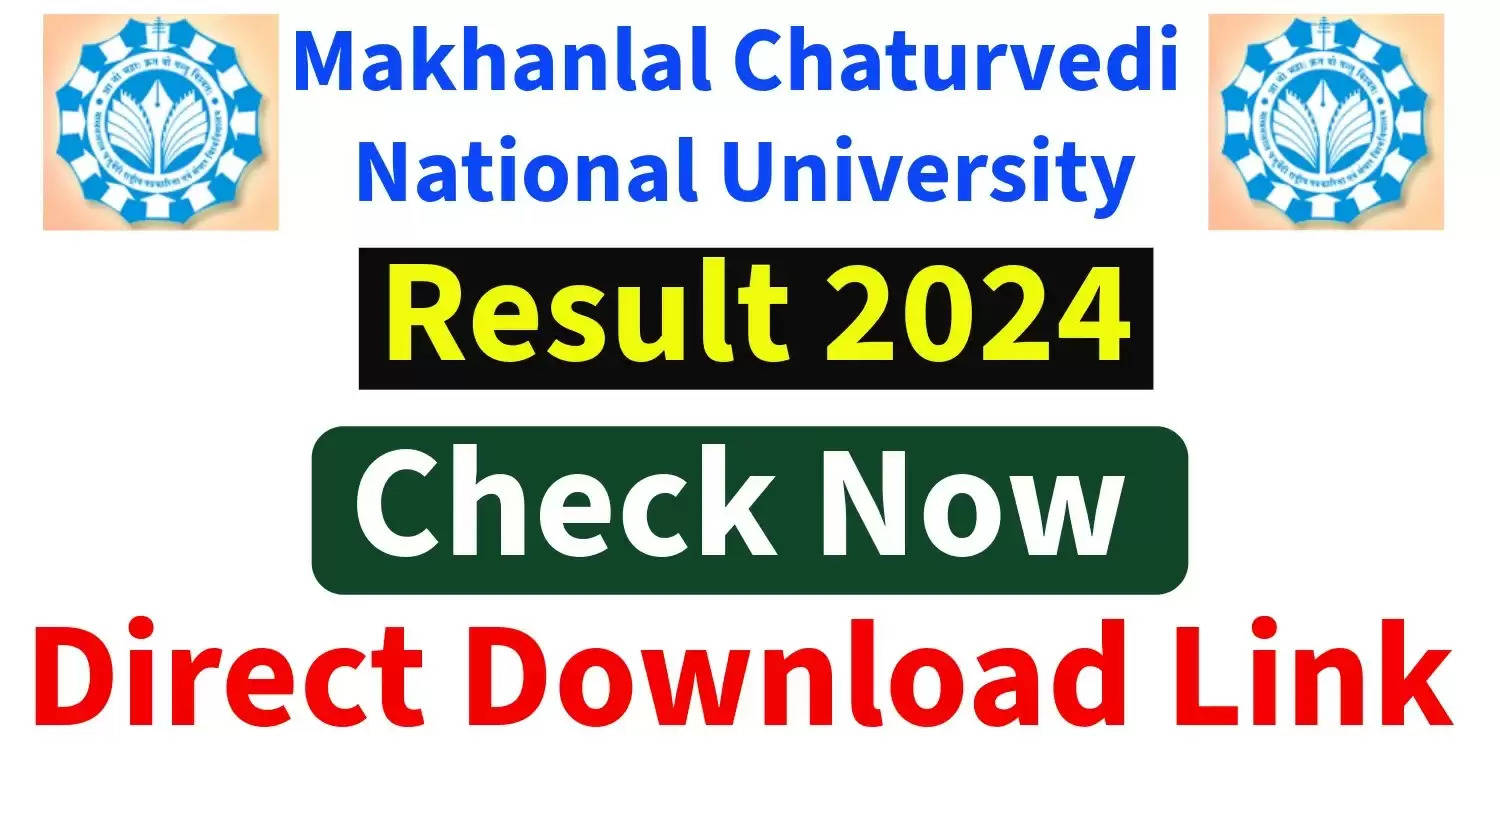 MCU Bhopal Declares Result 2024: Check Now at mcu.ac.in